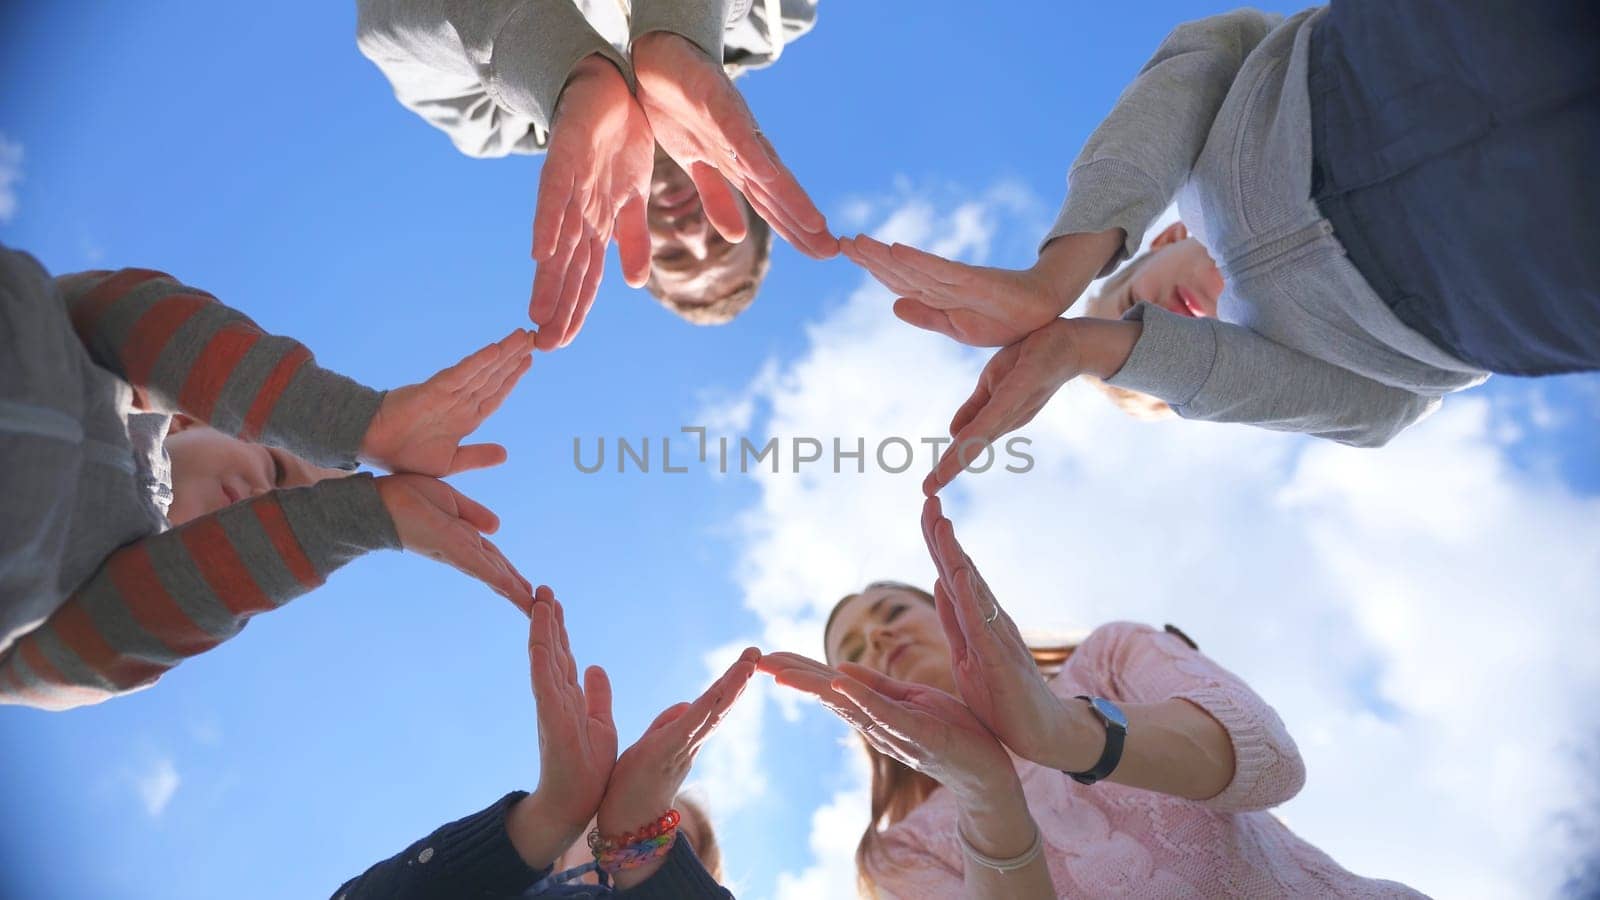 A friendly family makes a star shape out of their hands